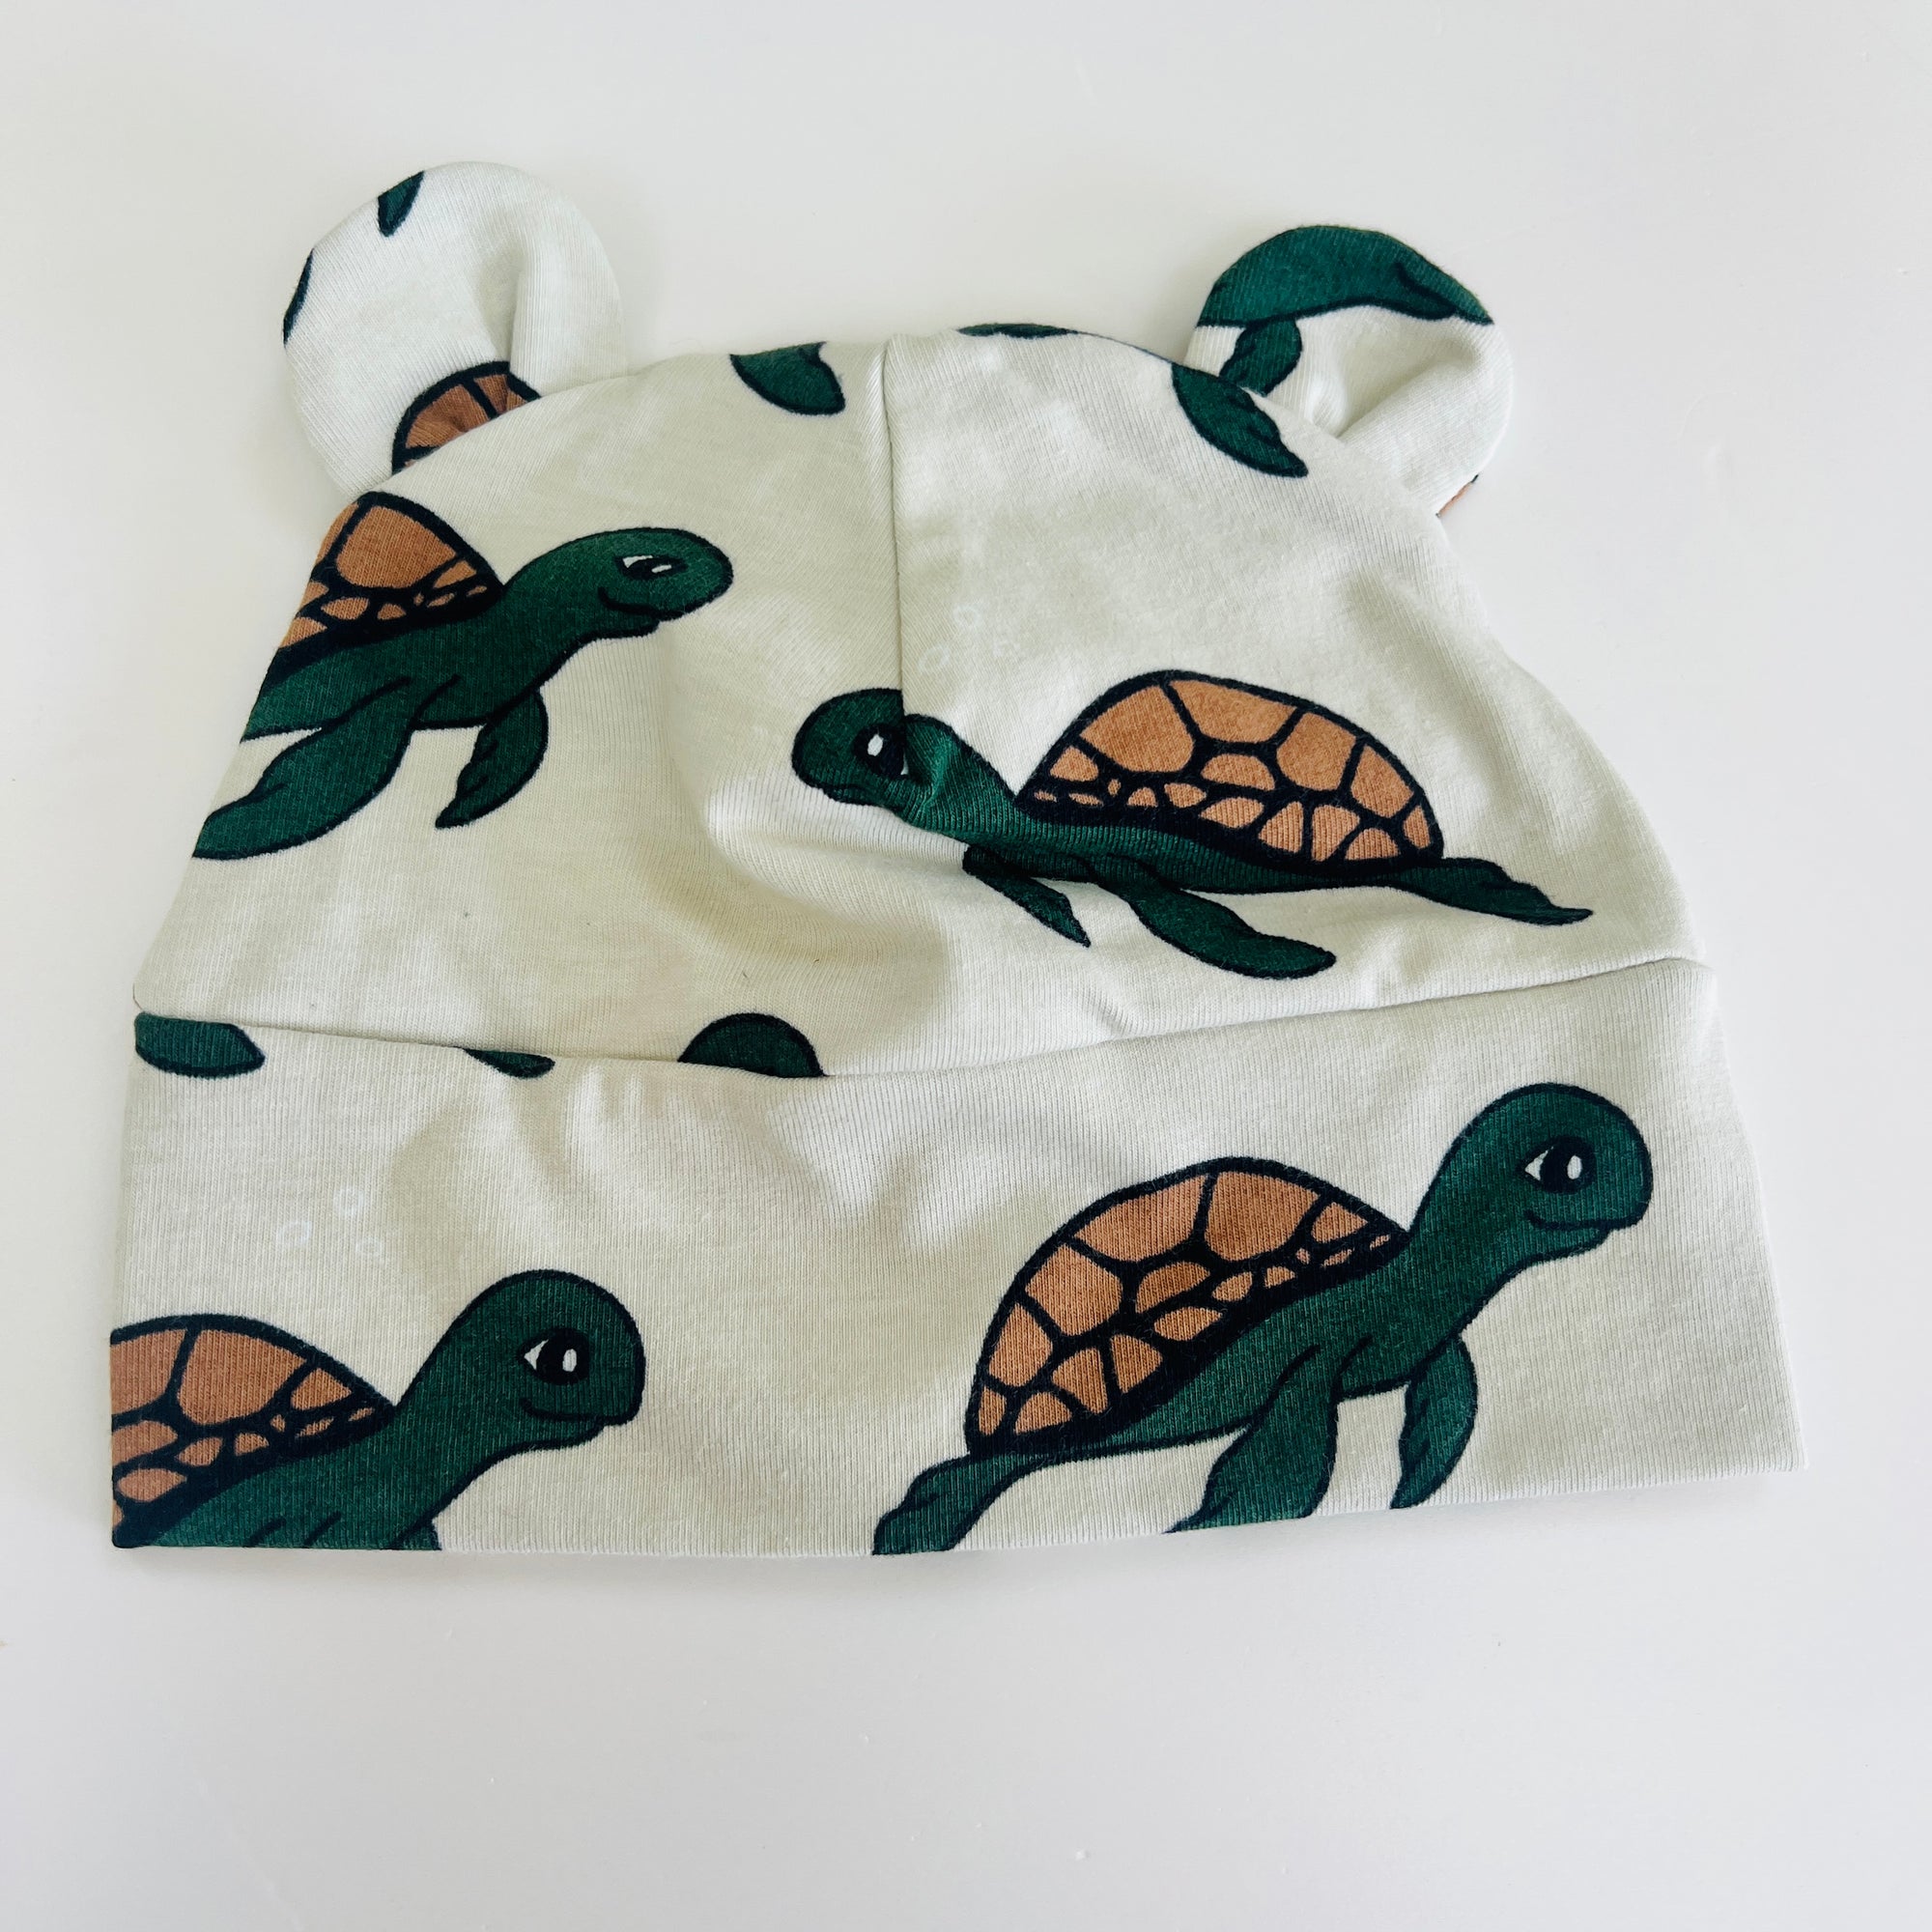 Eddie & Bee organic cotton Baby hat with ears  in Oat "Swimming Turtle" print.